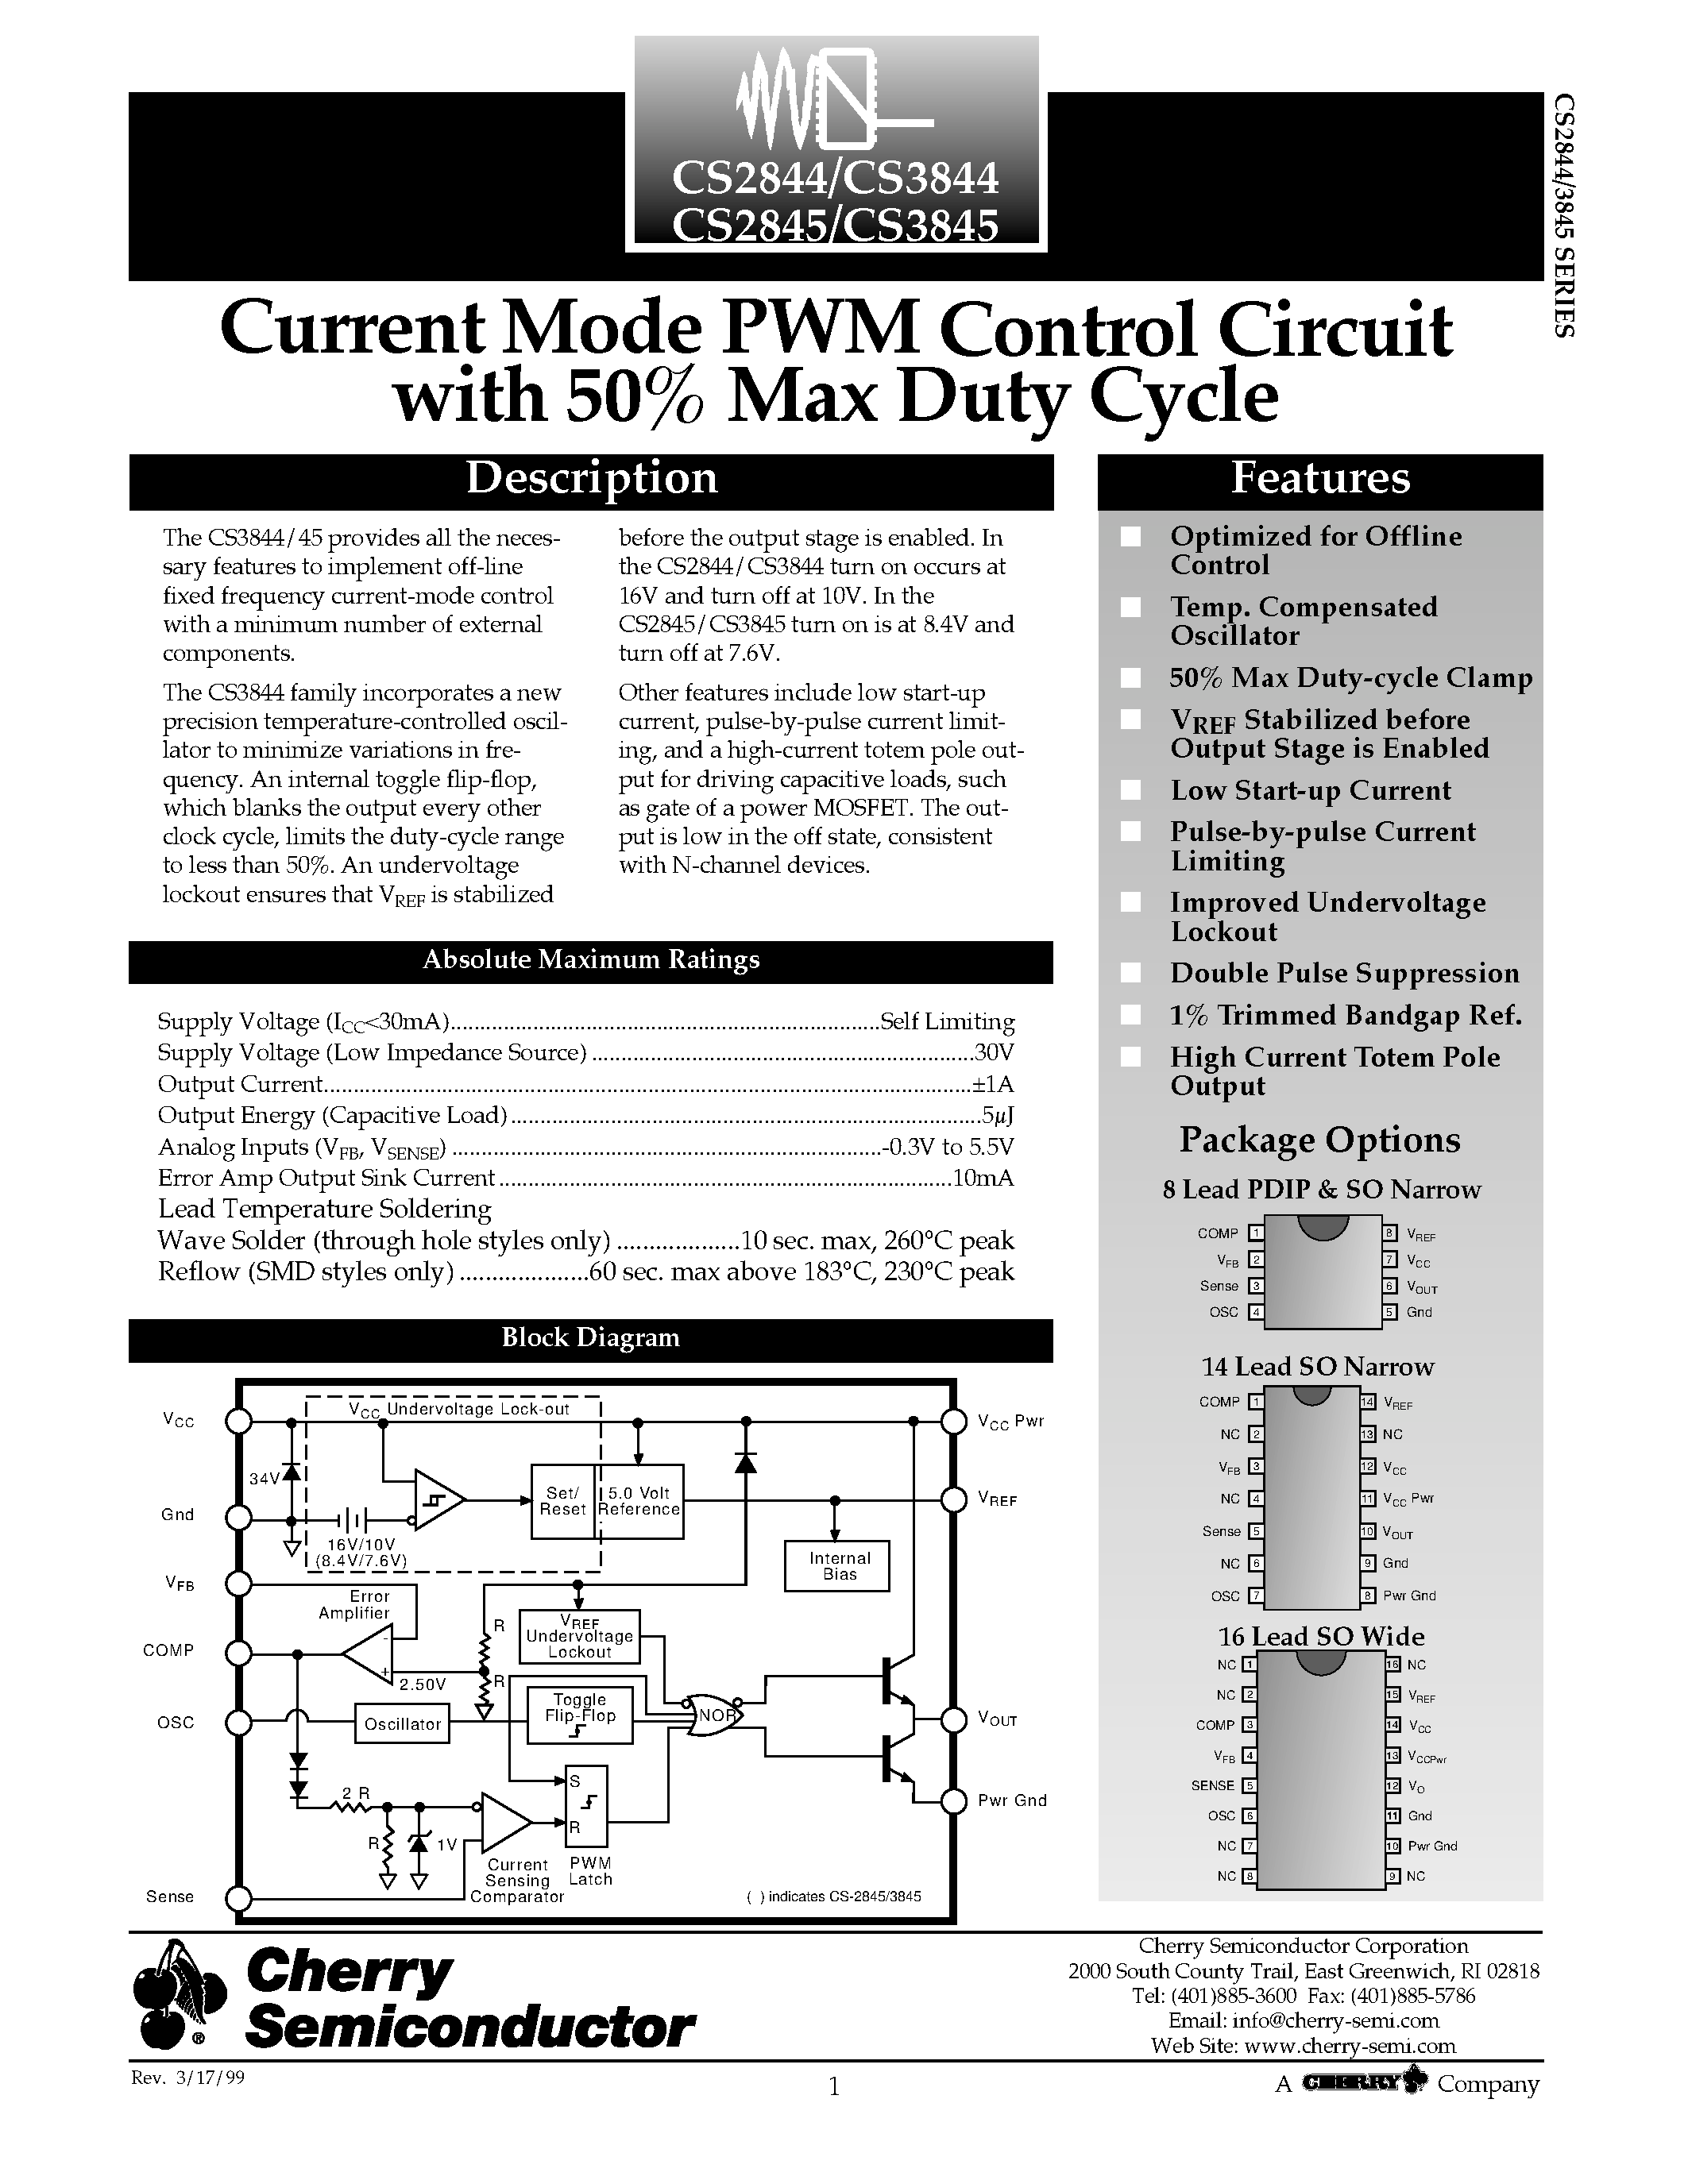 Datasheet CS2845LN8 - Current Mode PWM Control Circuit with 50% Max Duty Cycle page 1